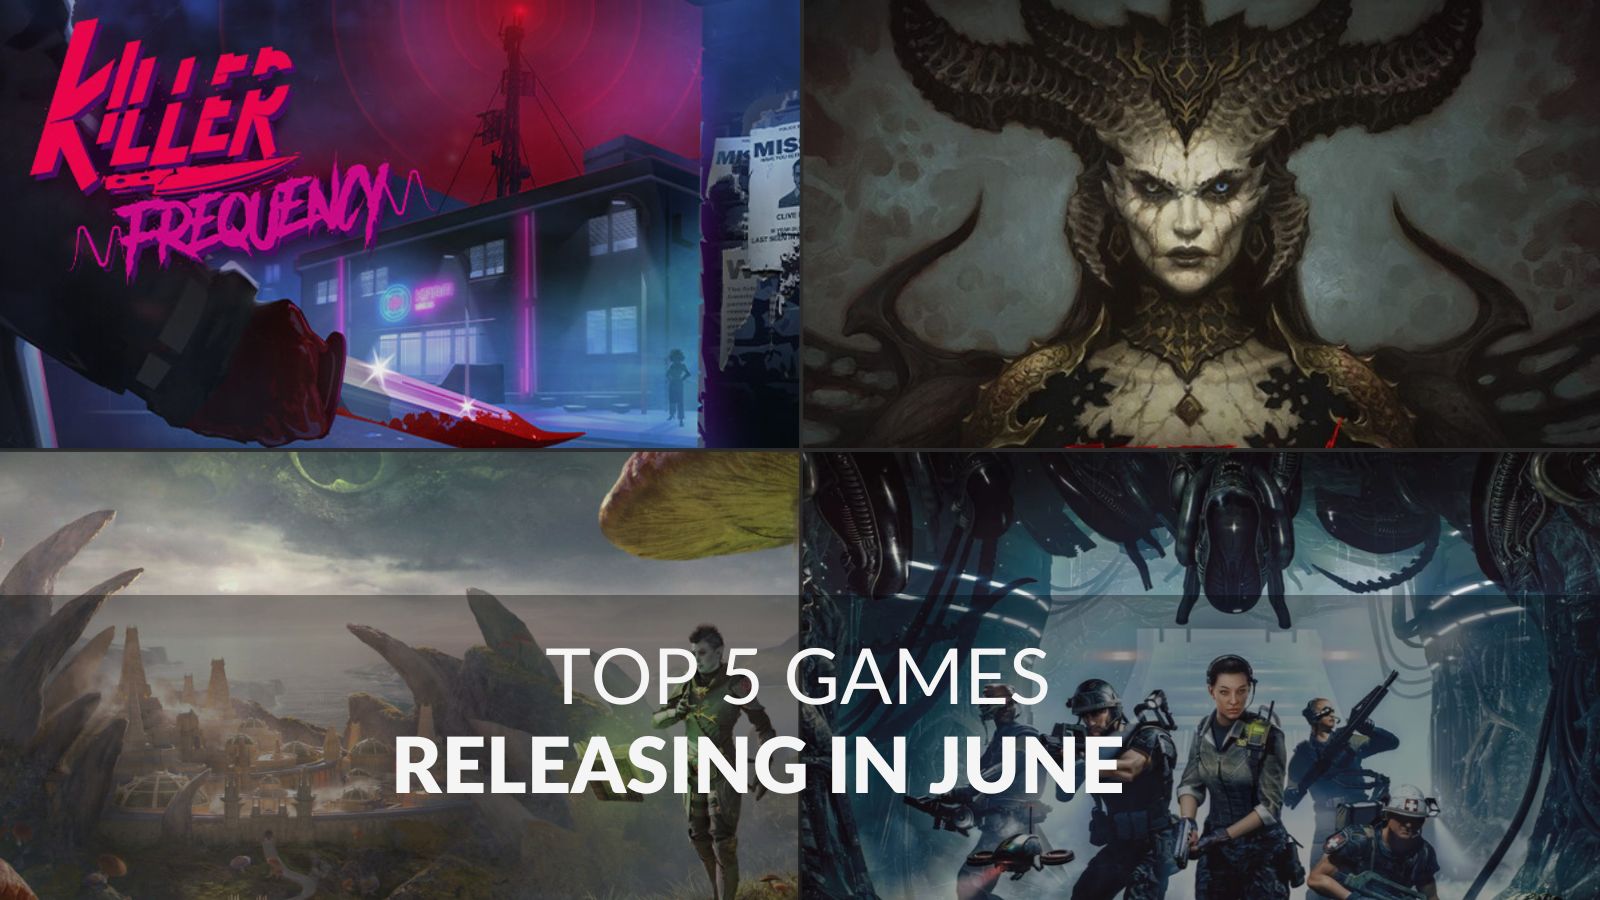 Top 5 New Game Releases Coming in June!